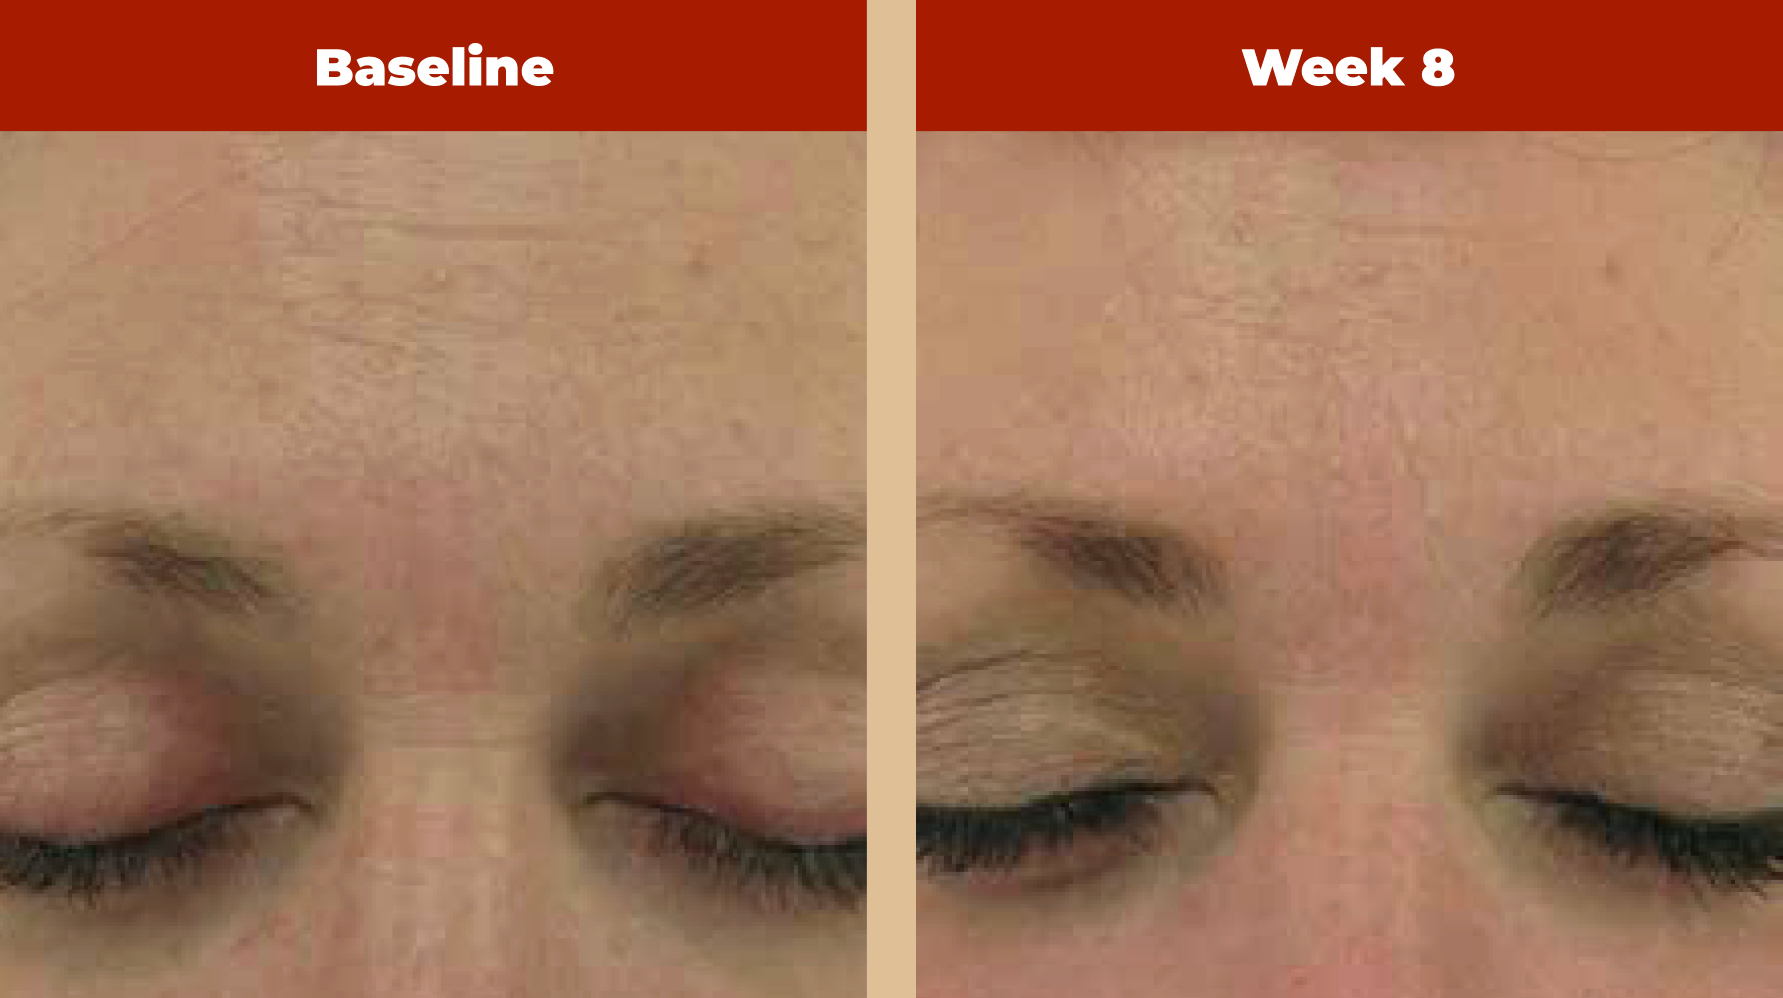 Unretouched photographs of patient at baseline and after daily evening use of Retriderm Mild 0.5%. Photographs courtesy of Michael Gold, MD.